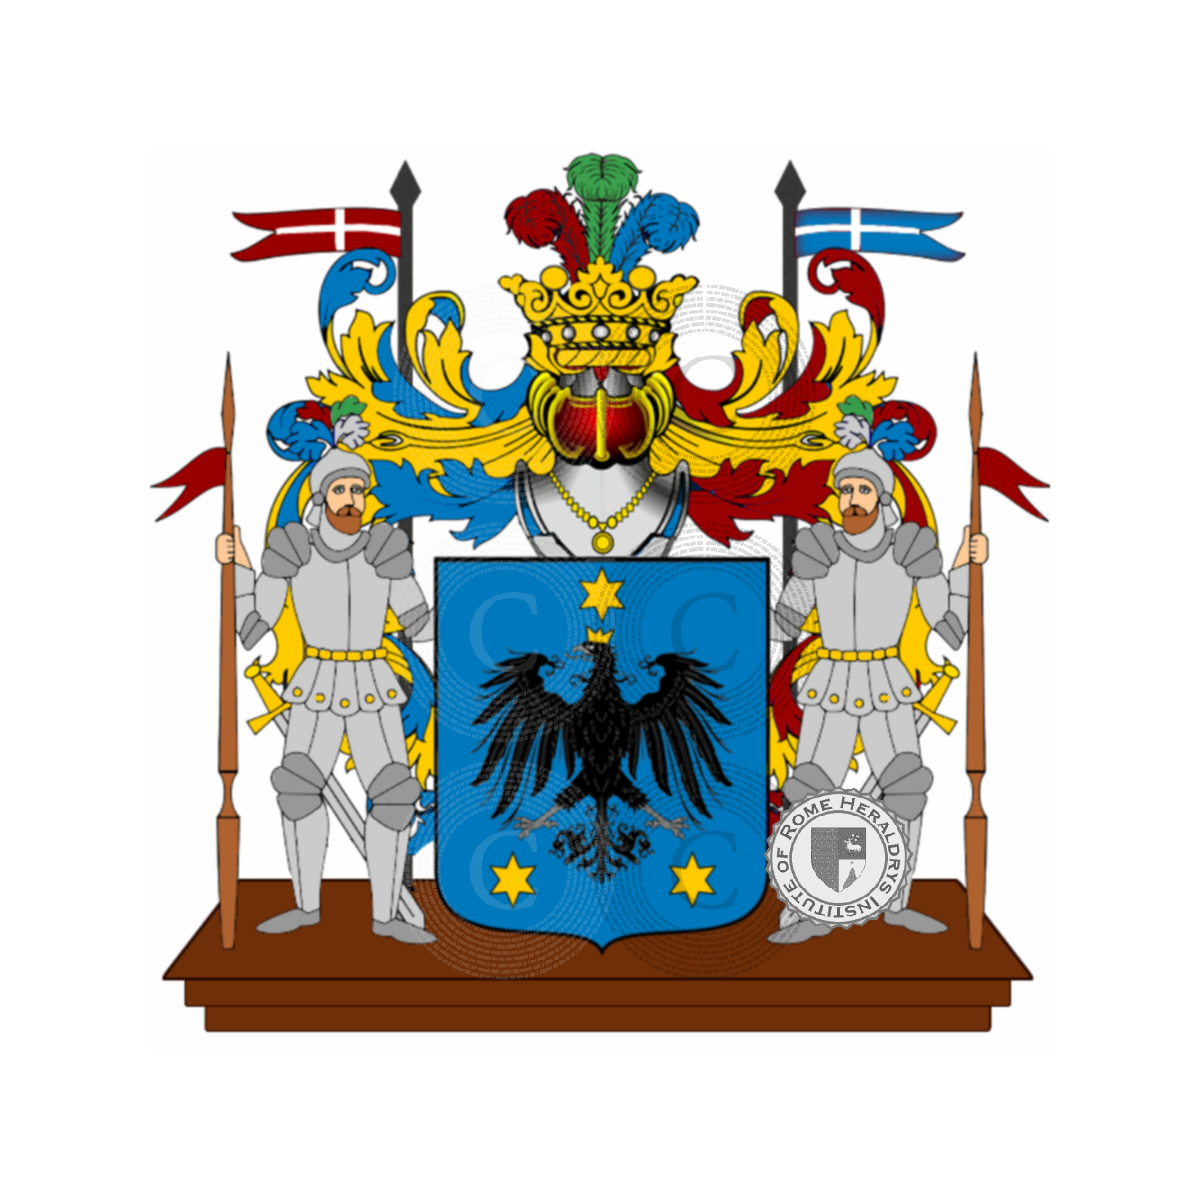 Coat of arms of family Romo